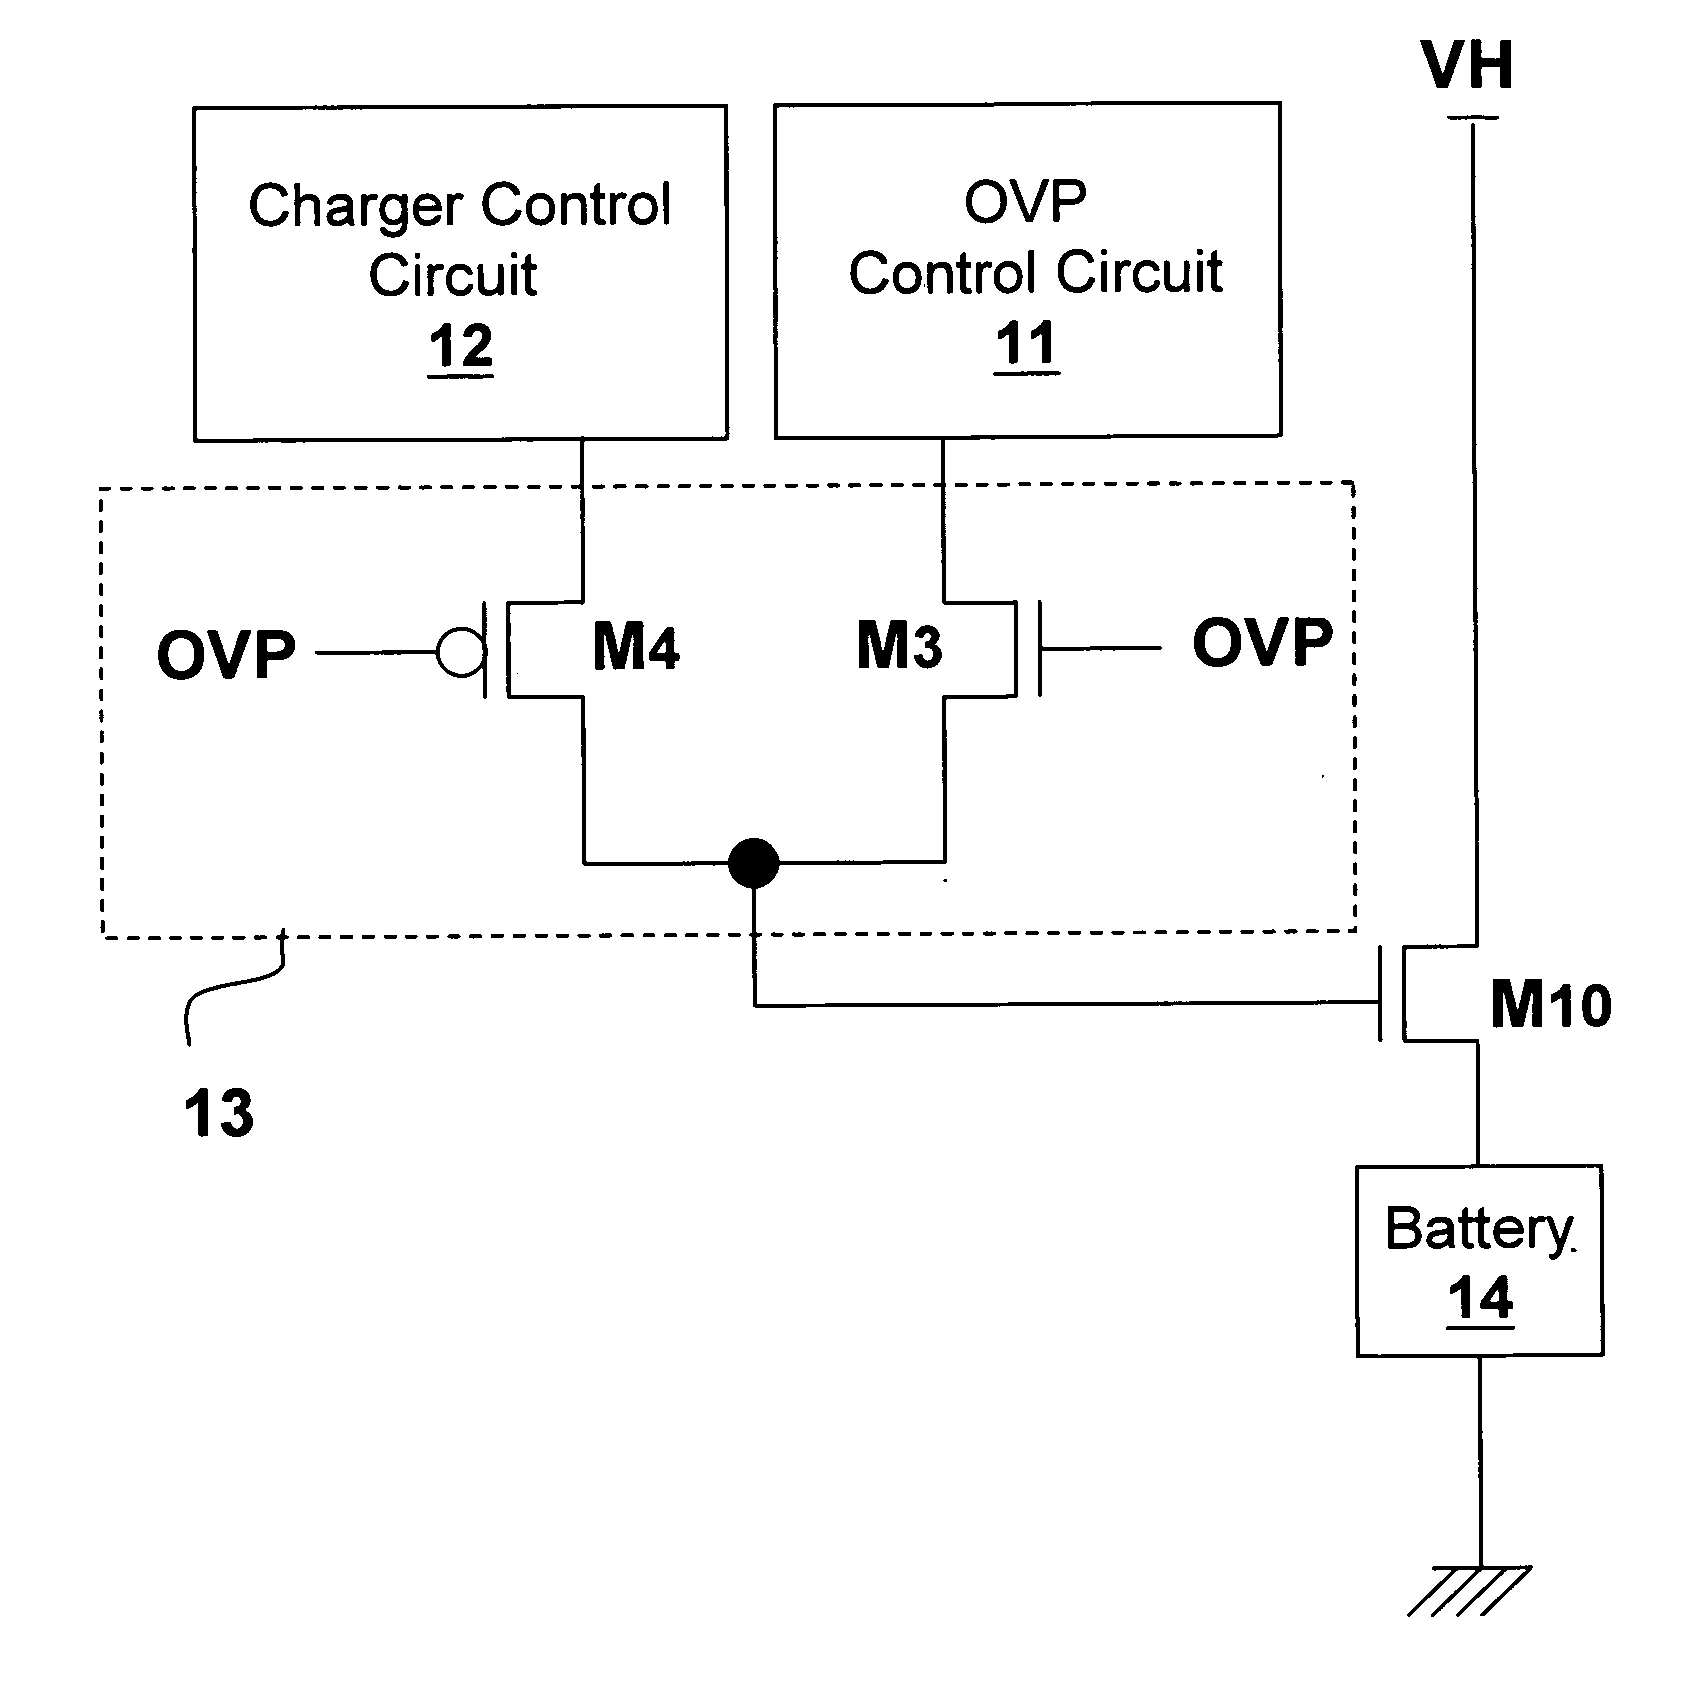 Overvoltage protection circuit for use in charger circuit system and charge circuit with overvoltage protection function